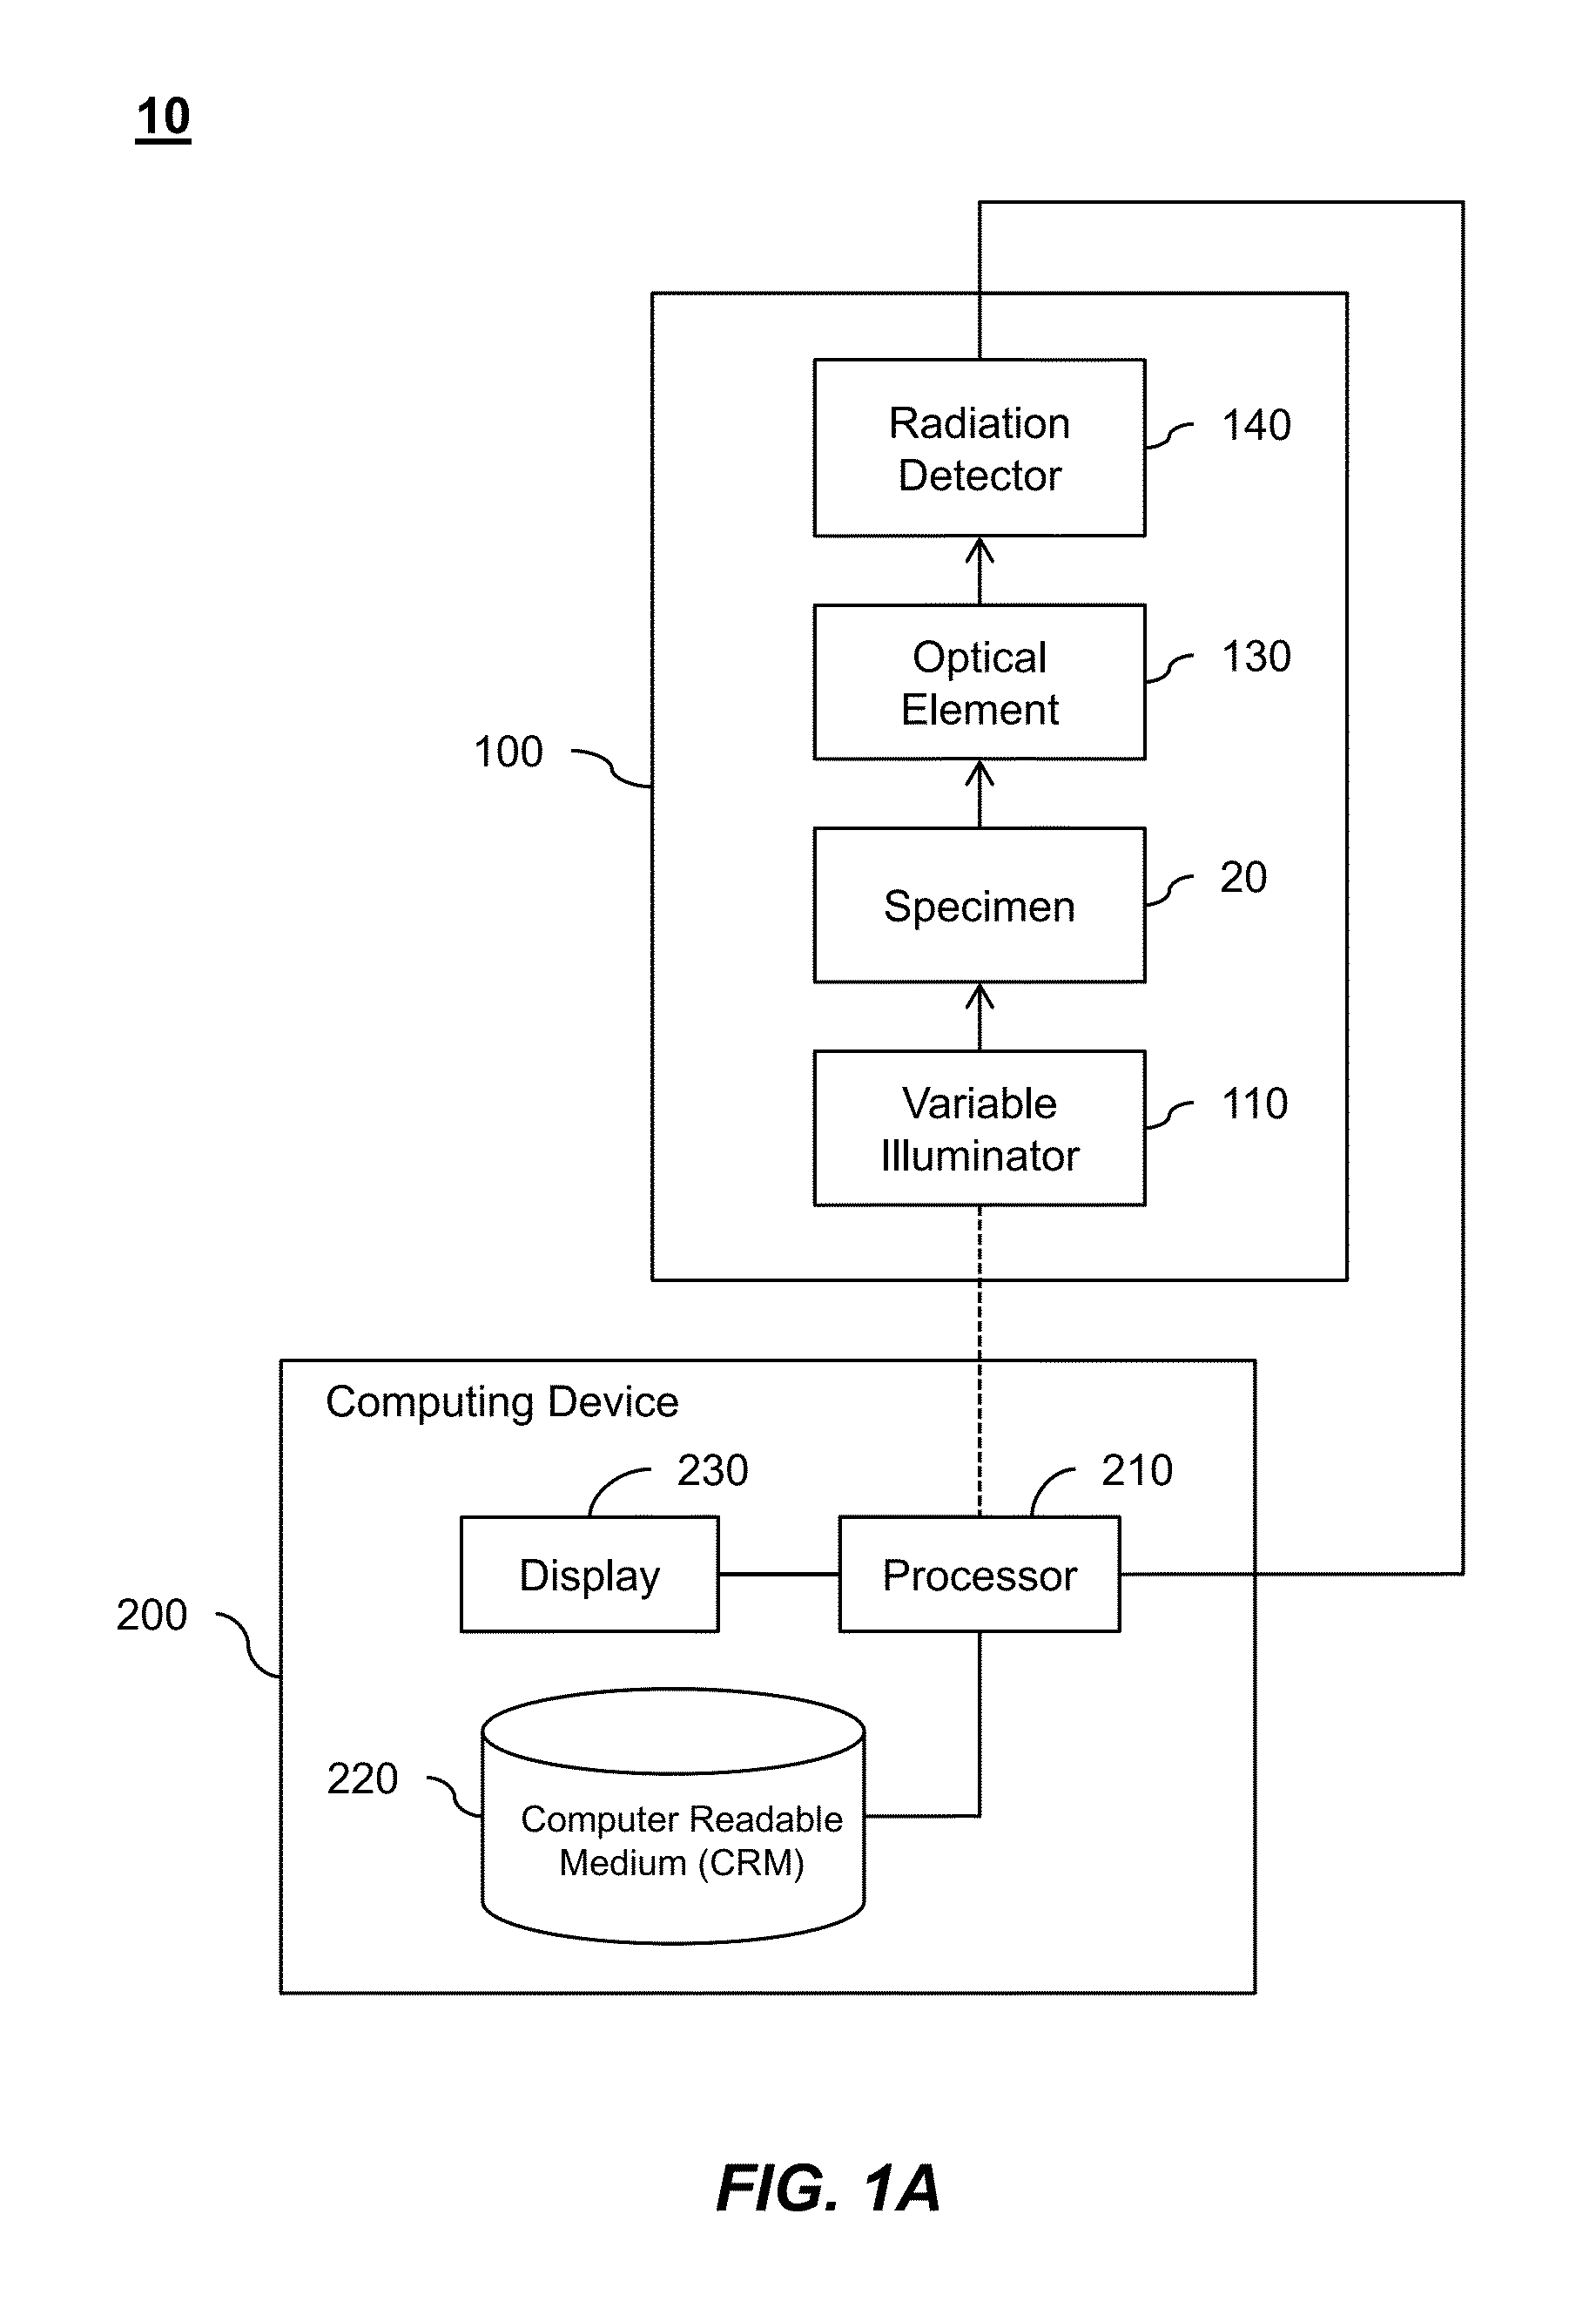 Fourier Ptychographic X-ray Imaging Systems, Devices, and Methods